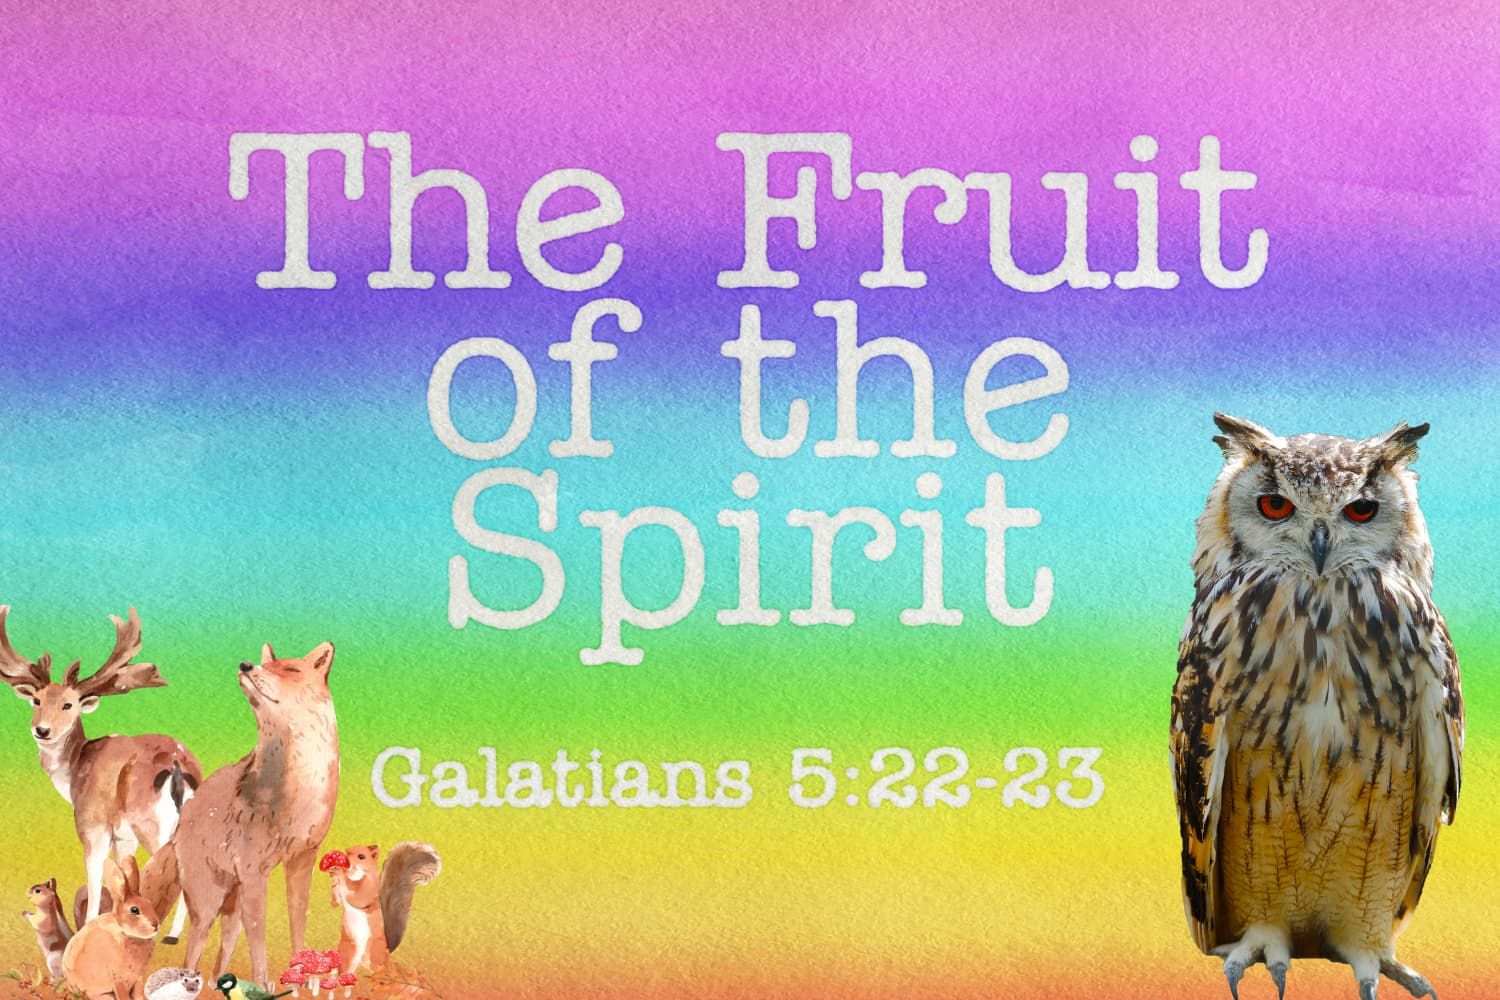 Parable%20-%20Wise%20owl%20and%20fruit%20of%20the%20spirit-d9417540 Love / heart